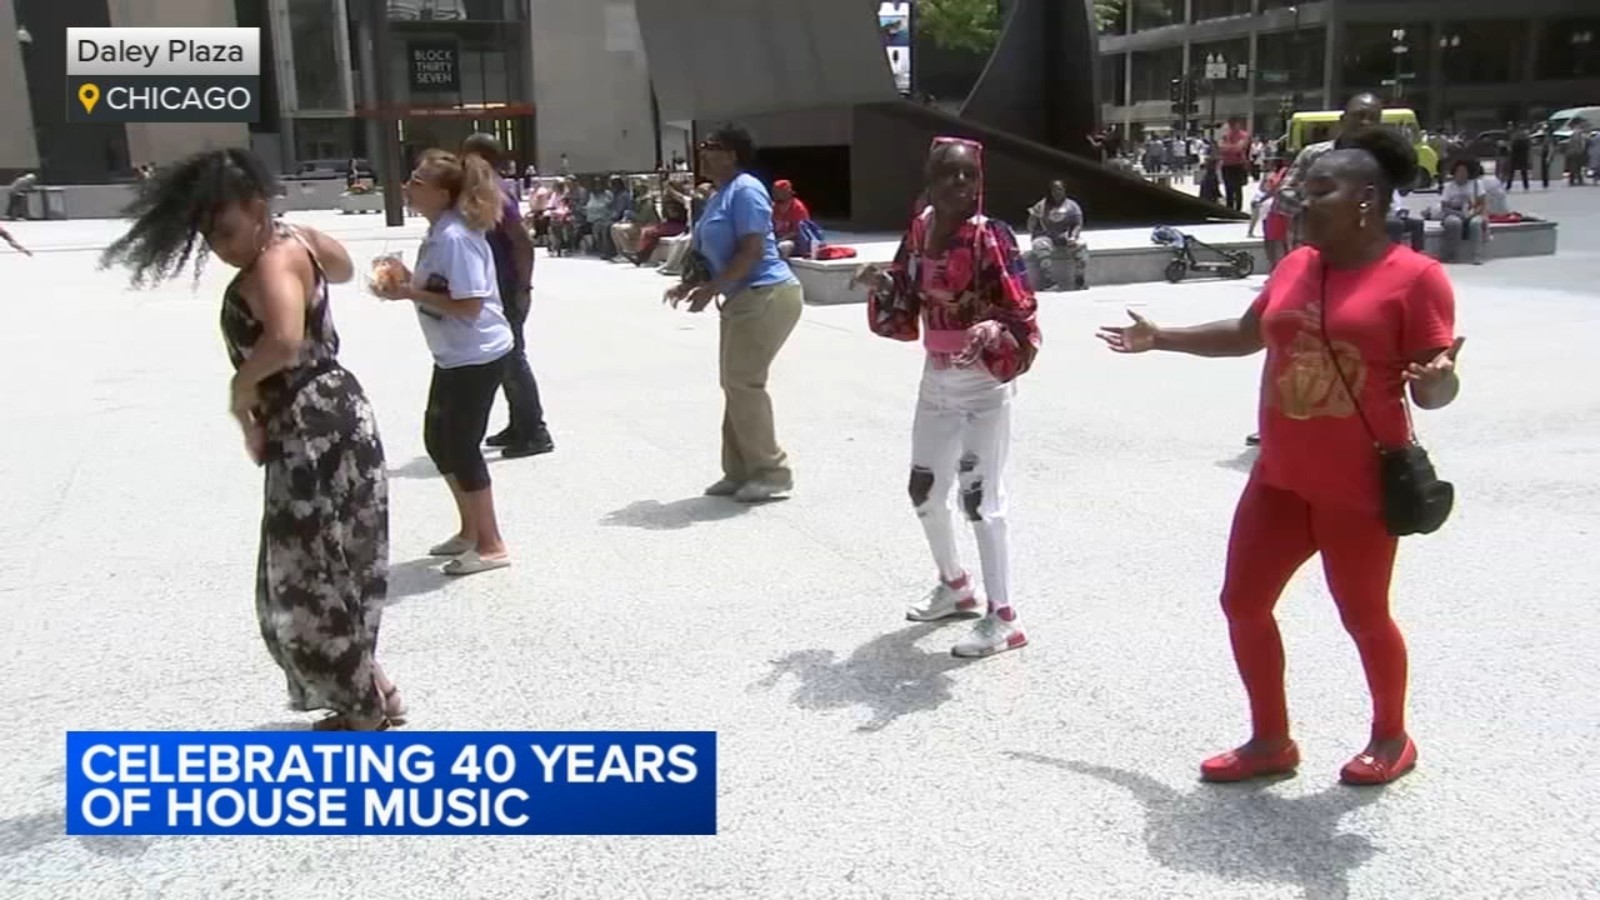 Daley Plaza dance party celebrates 40 years of house music in Chicago, music fest planned for June 2